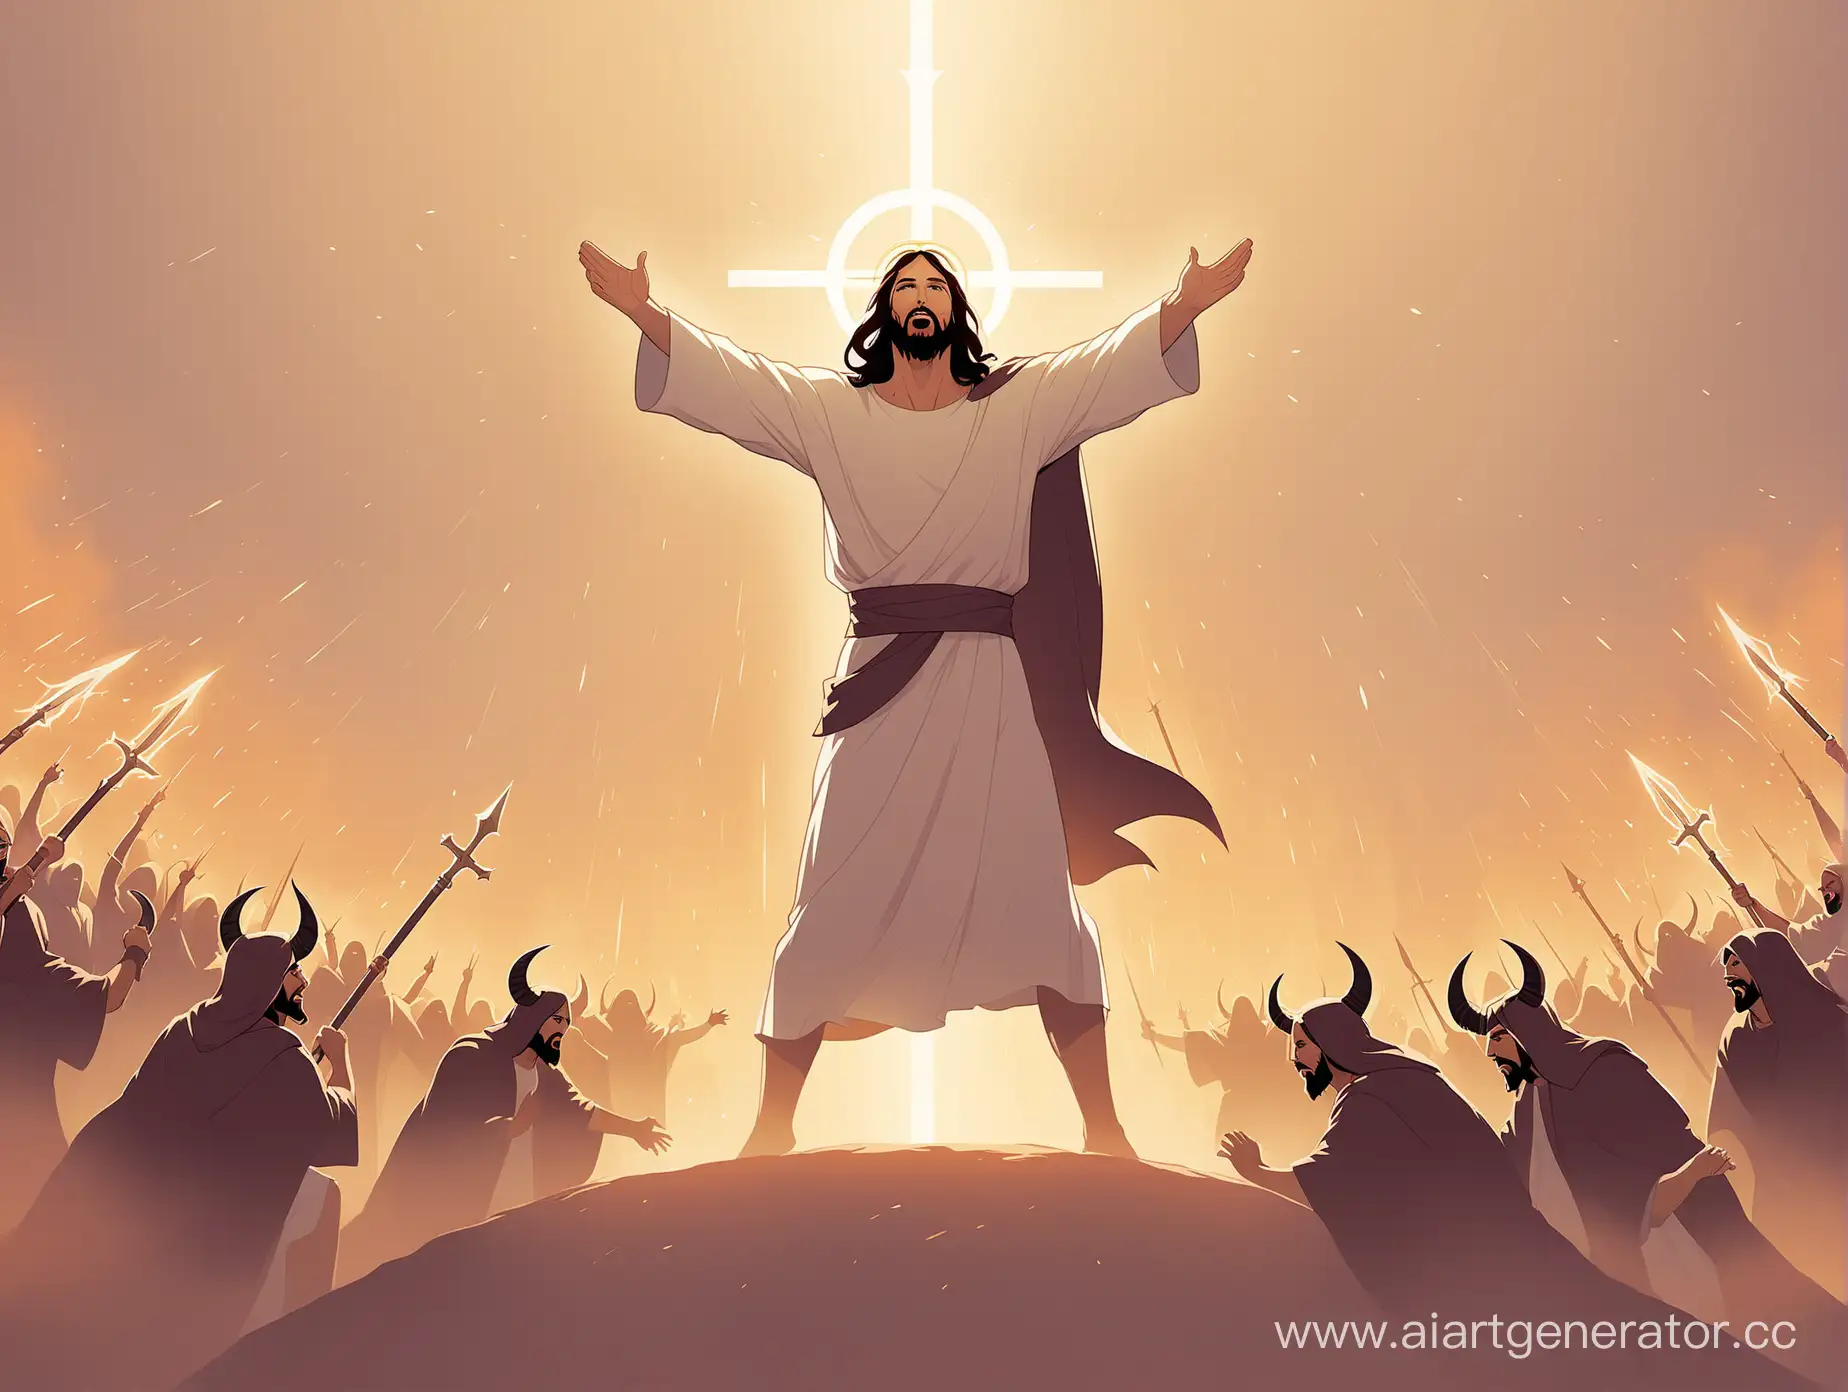 Epic-Minimalist-Depiction-of-Jesus-Christ-in-Battle-Against-Unbelievers-and-Demons